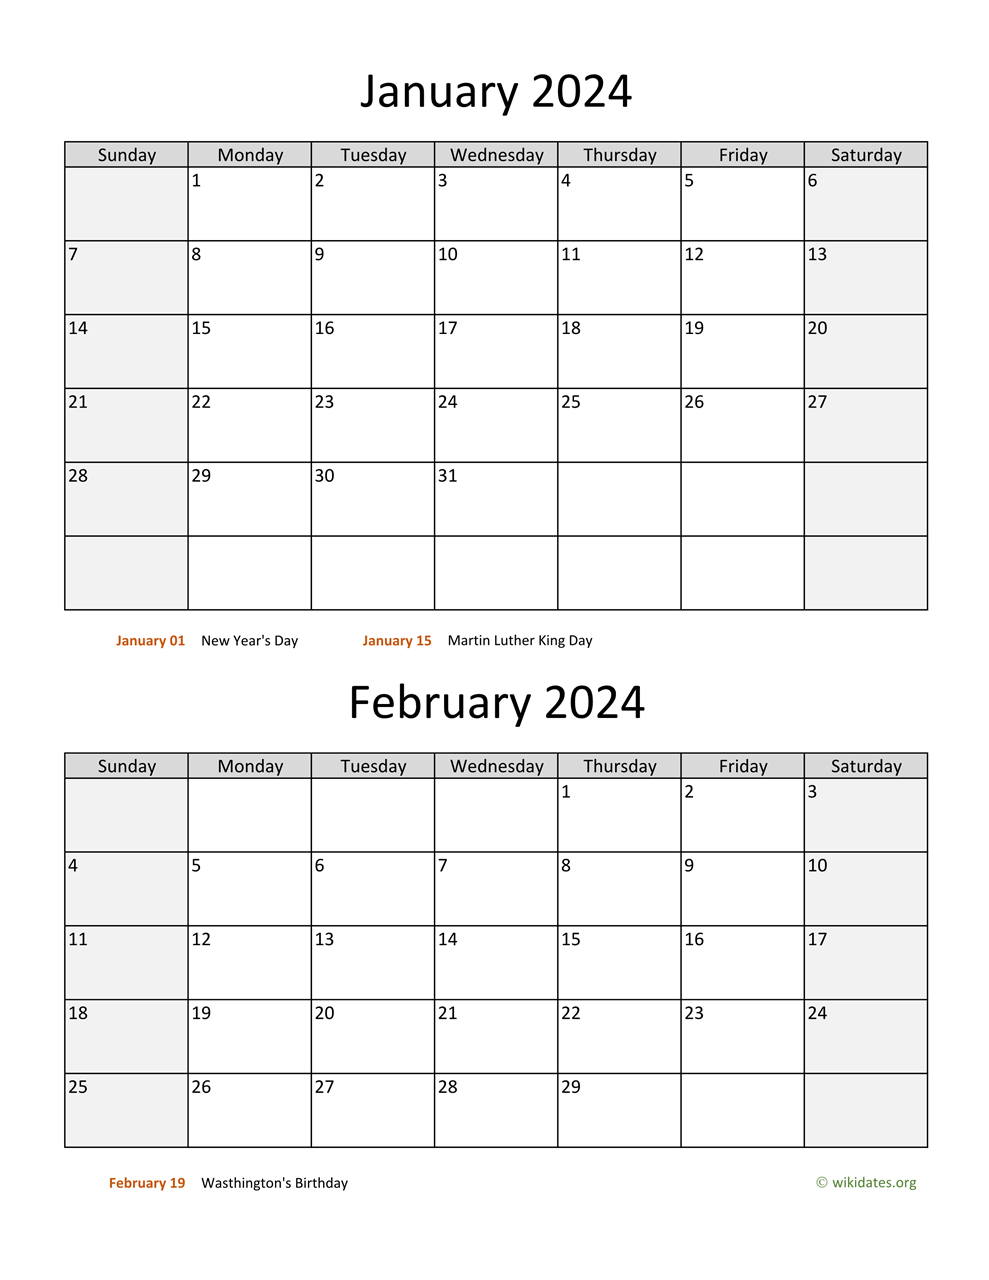 January And February 2024 Calendar | Wikidates for Printable Calendar For January And February 2024